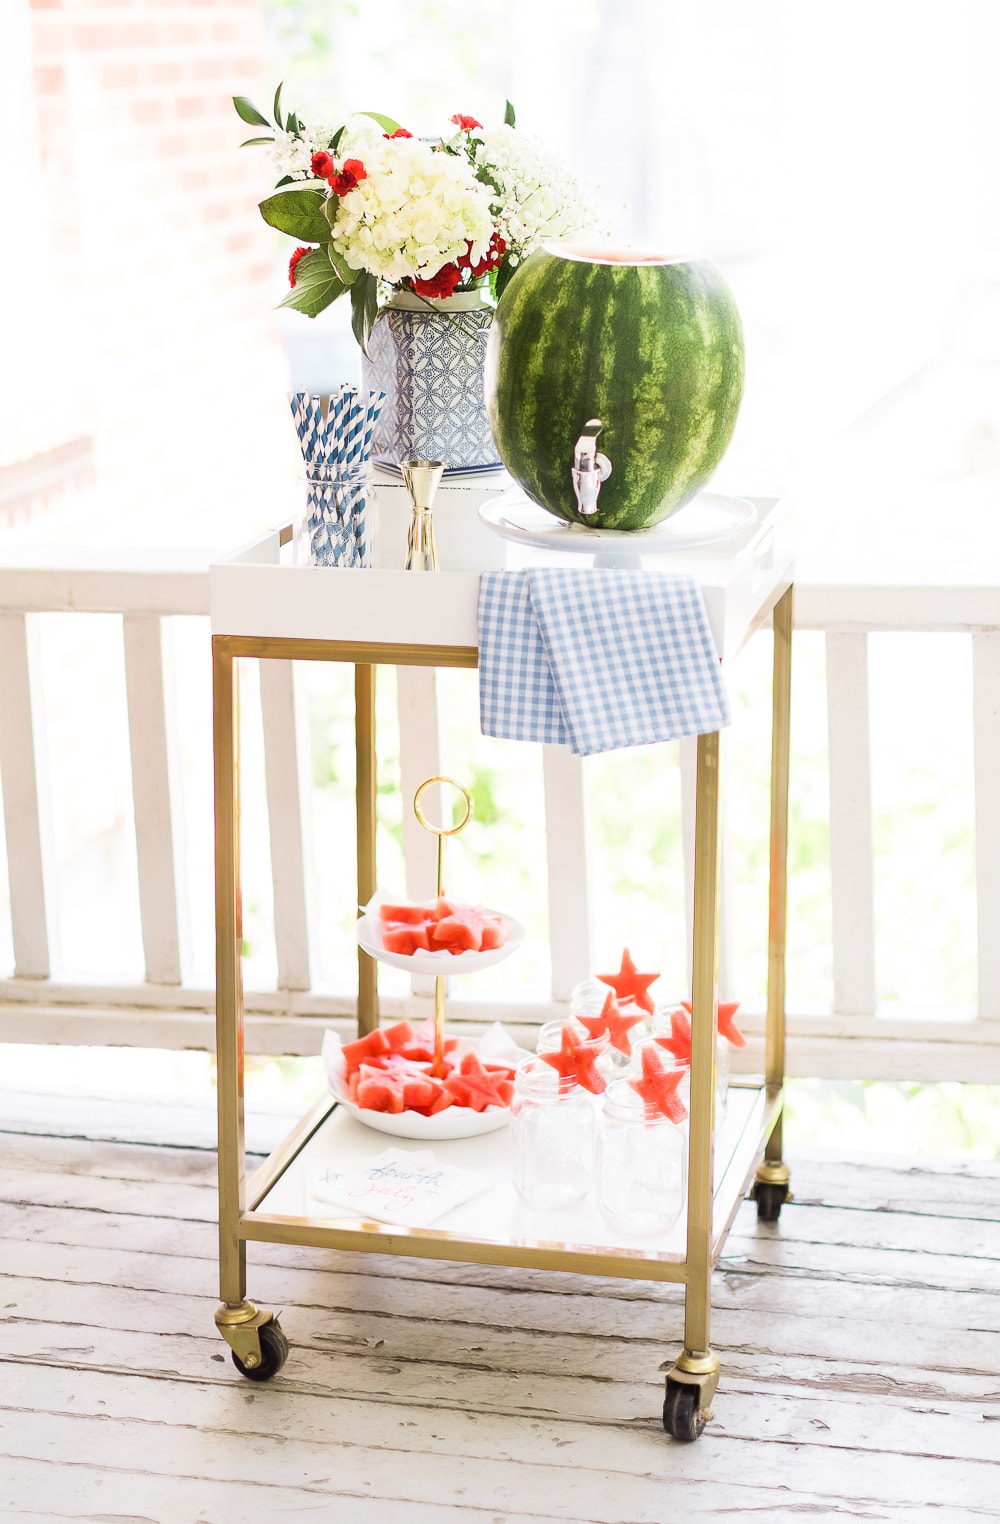 4th of July bar cart styling by blogger Stephanie Ziajka on Diary of a Debutante